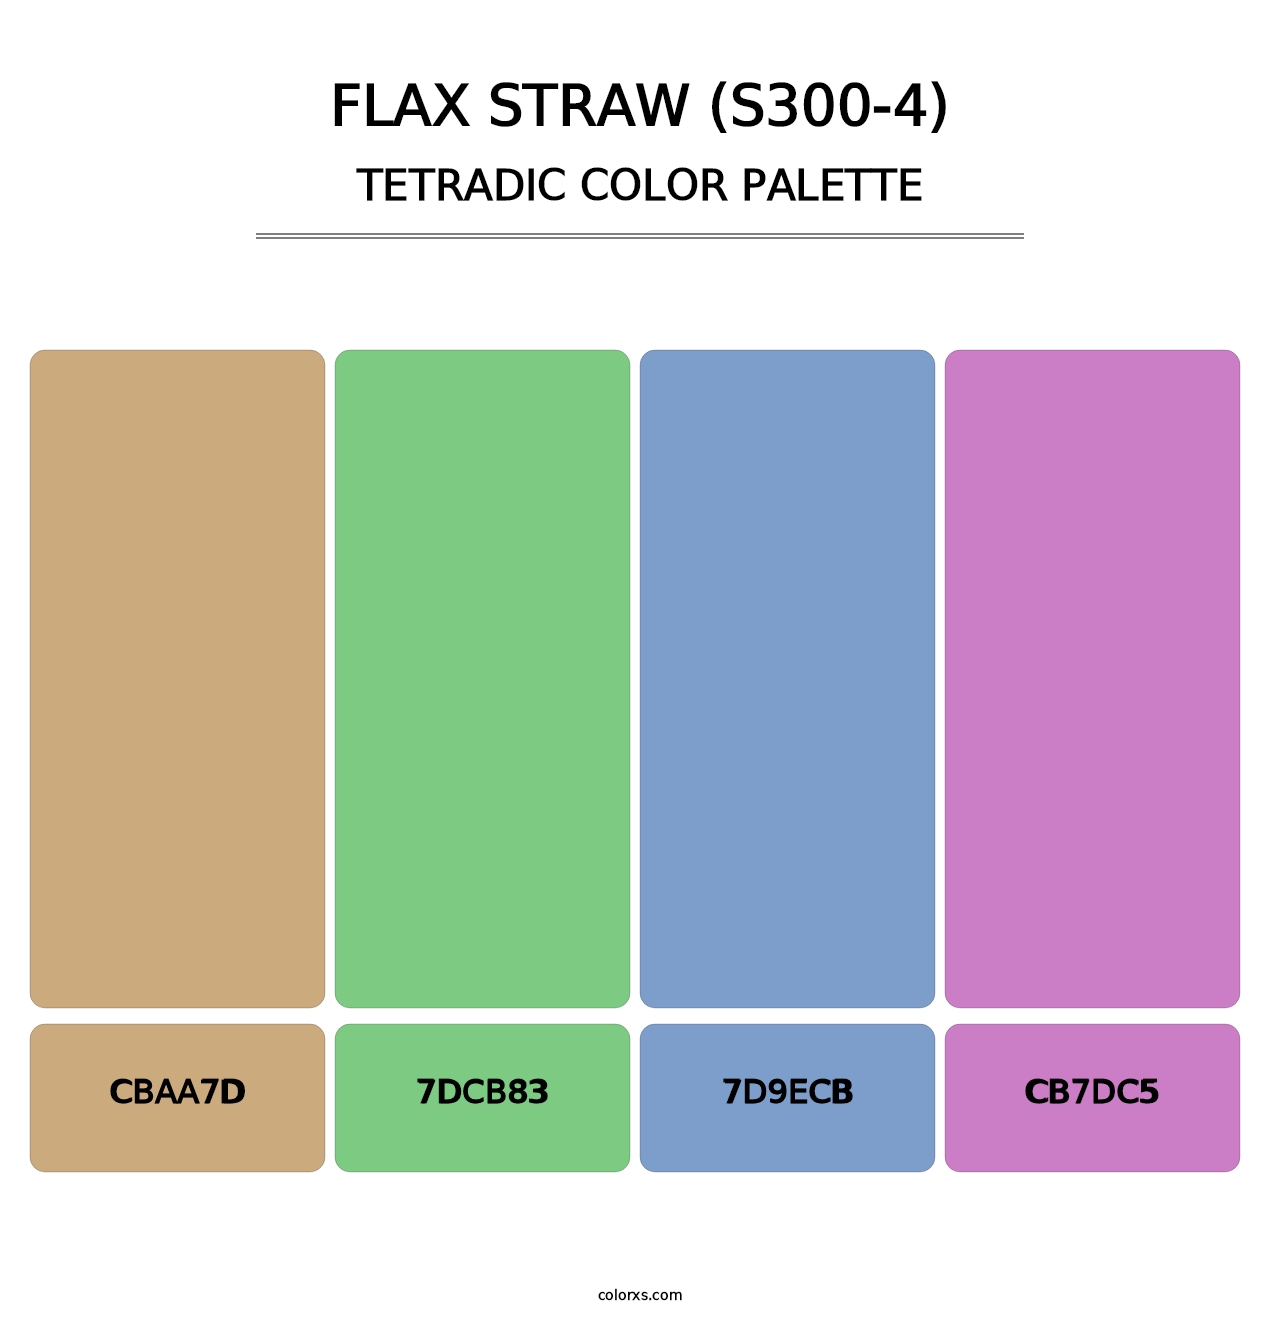 Flax Straw (S300-4) - Tetradic Color Palette